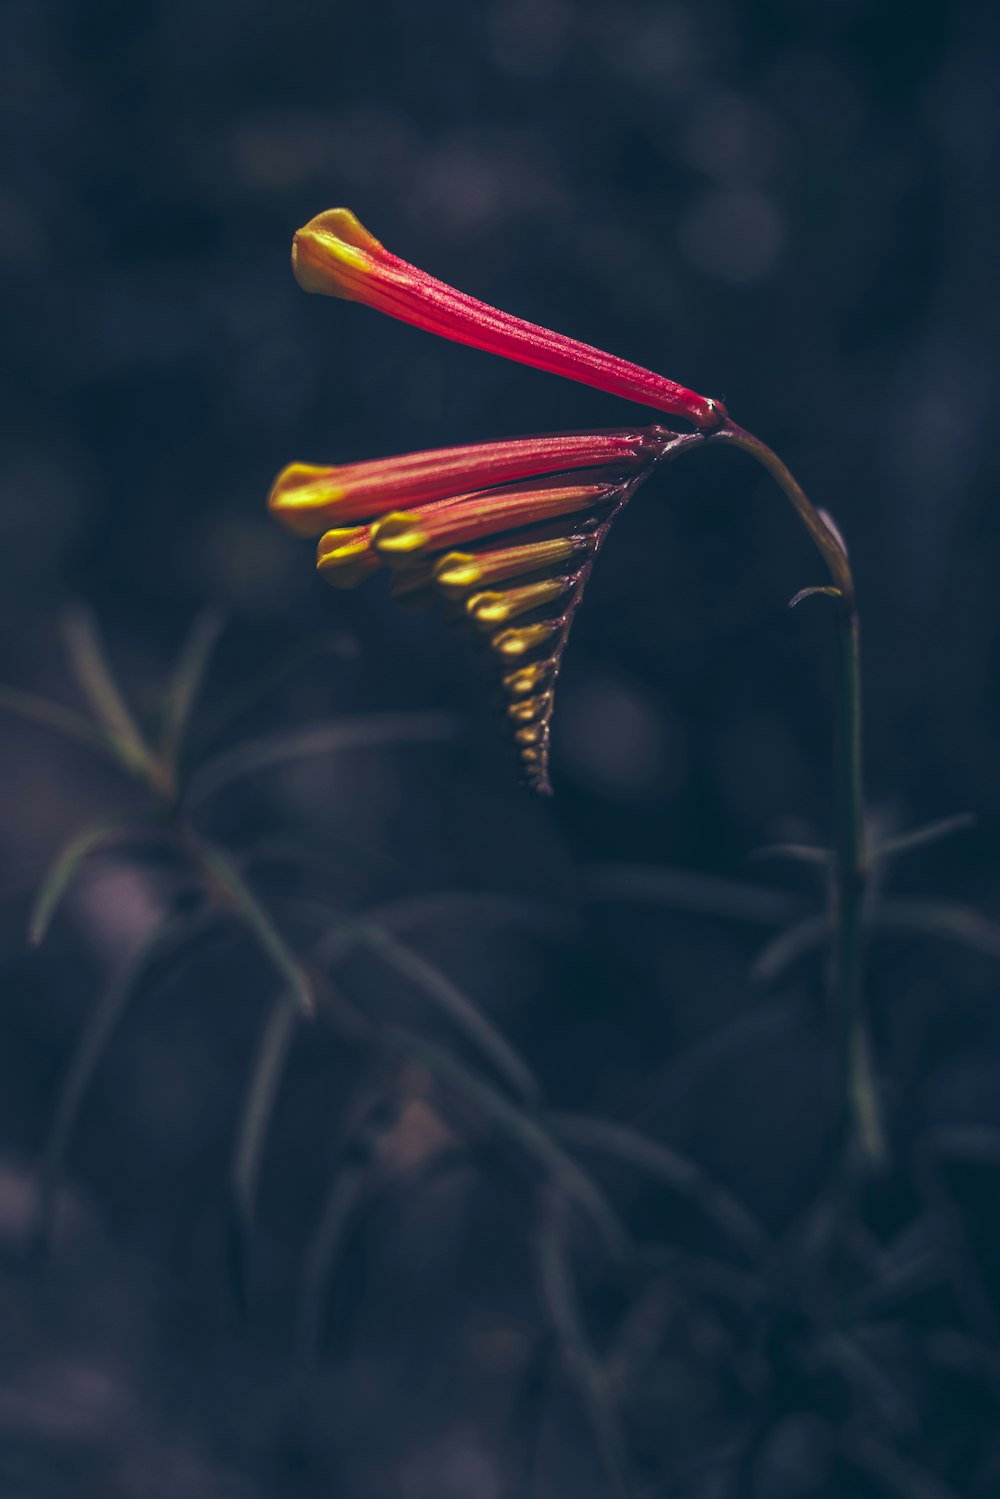 yellow and red birds of paradise flower in close up photography